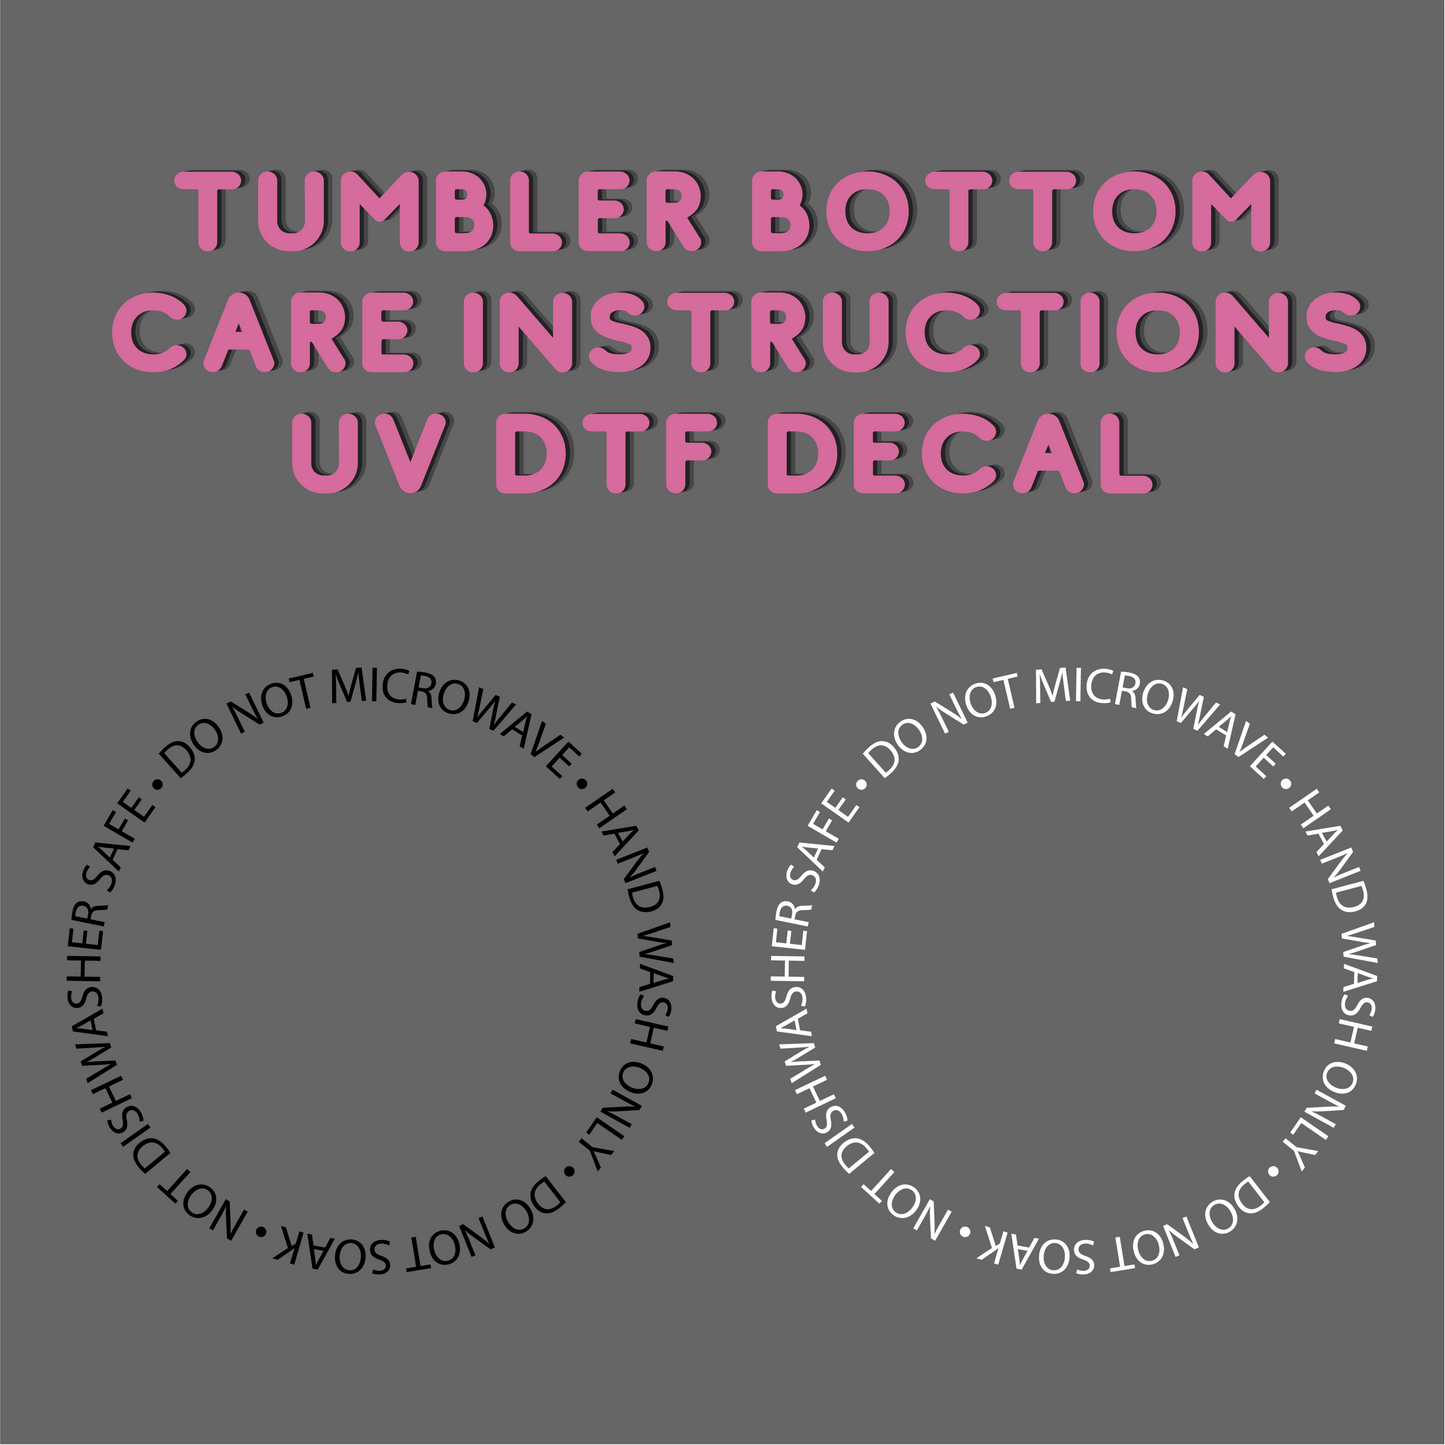 28 Tumbler Bottom Care Instructions UV DTF Decals